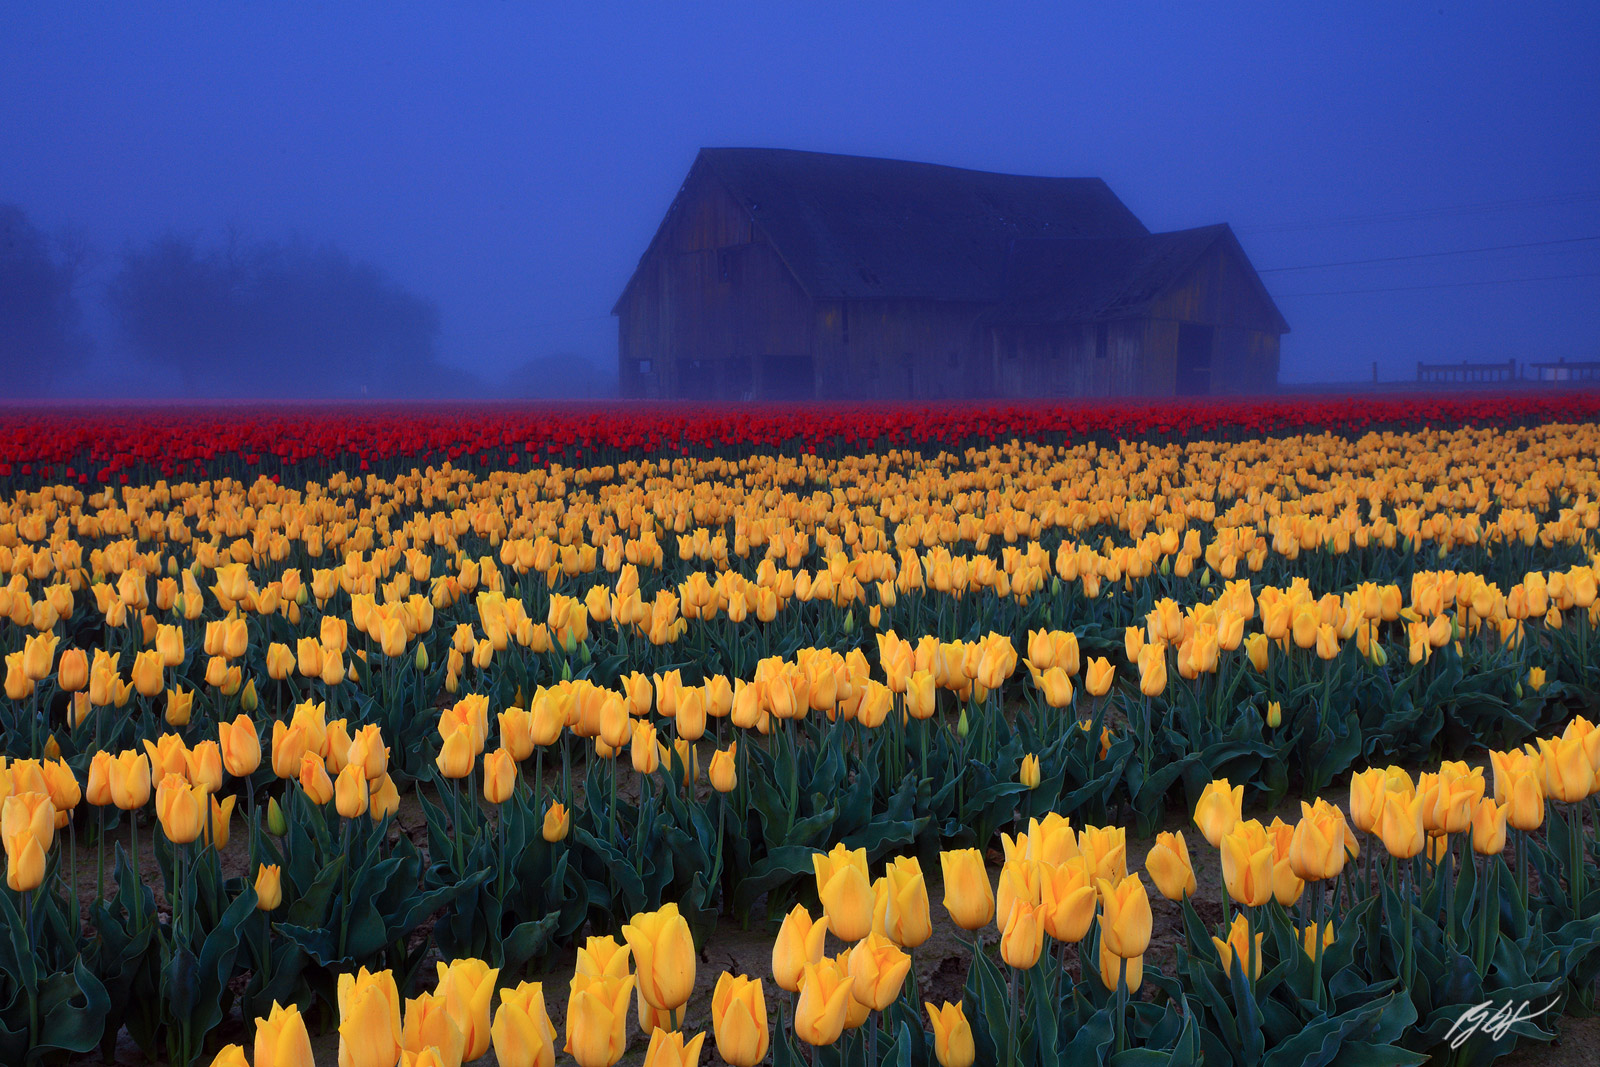 Foggy Morning and Barn in the Tulips in Skagit Valley Washington